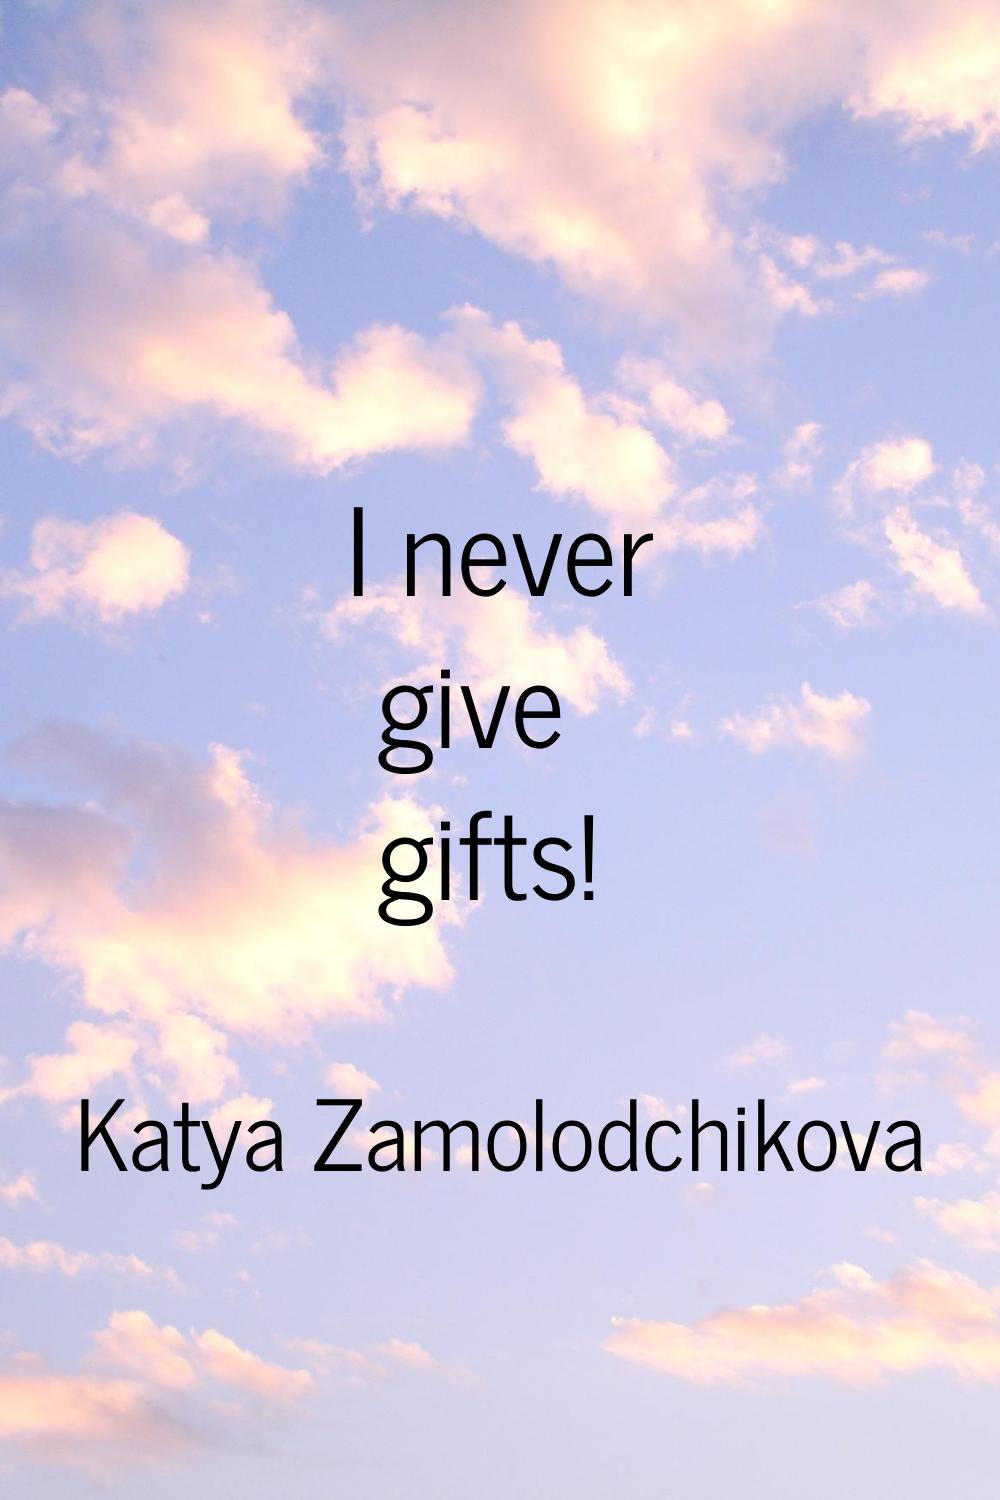 I never give gifts!